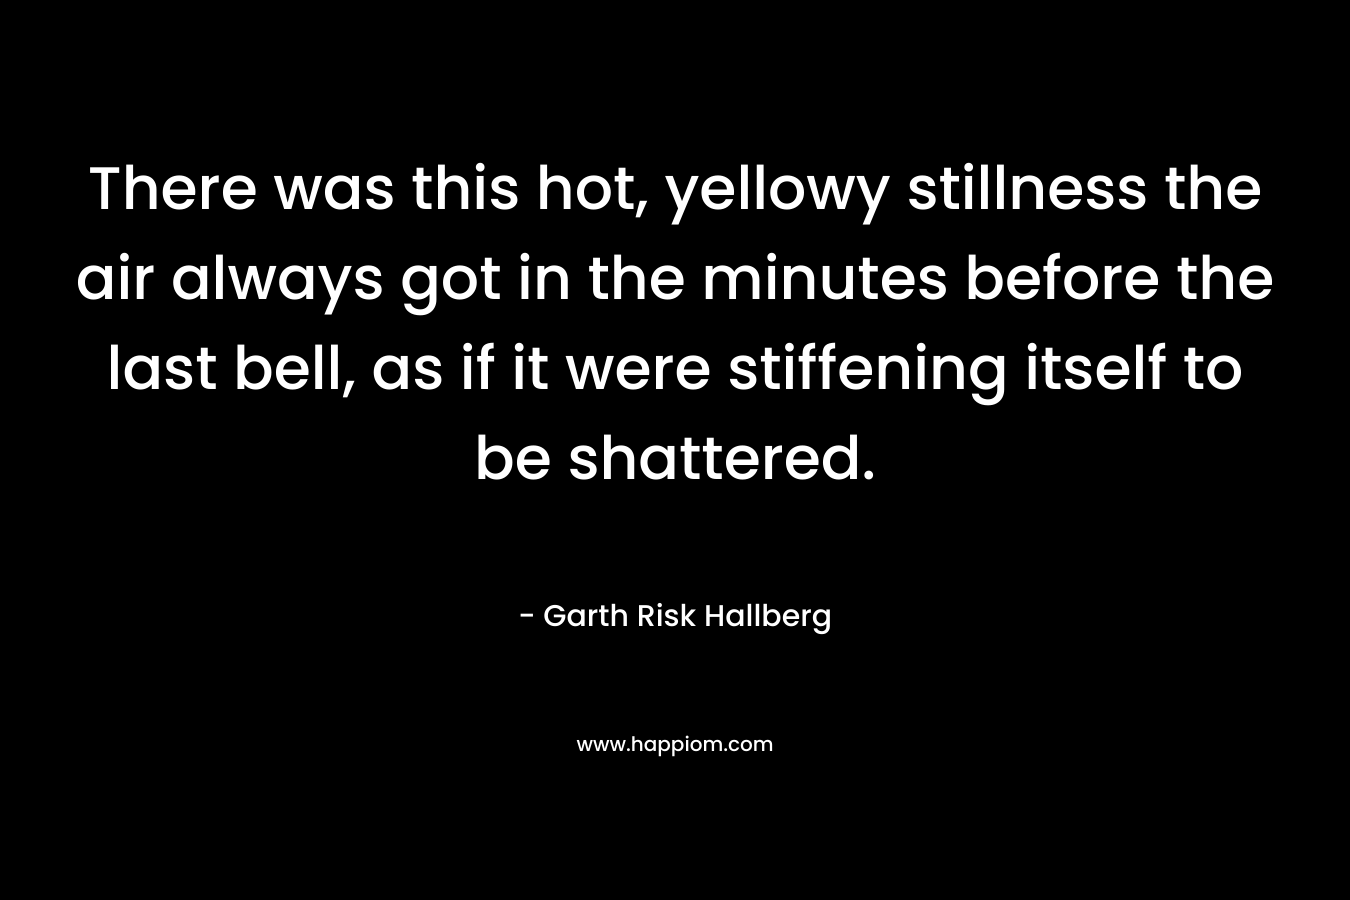 There was this hot, yellowy stillness the air always got in the minutes before the last bell, as if it were stiffening itself to be shattered. – Garth Risk Hallberg